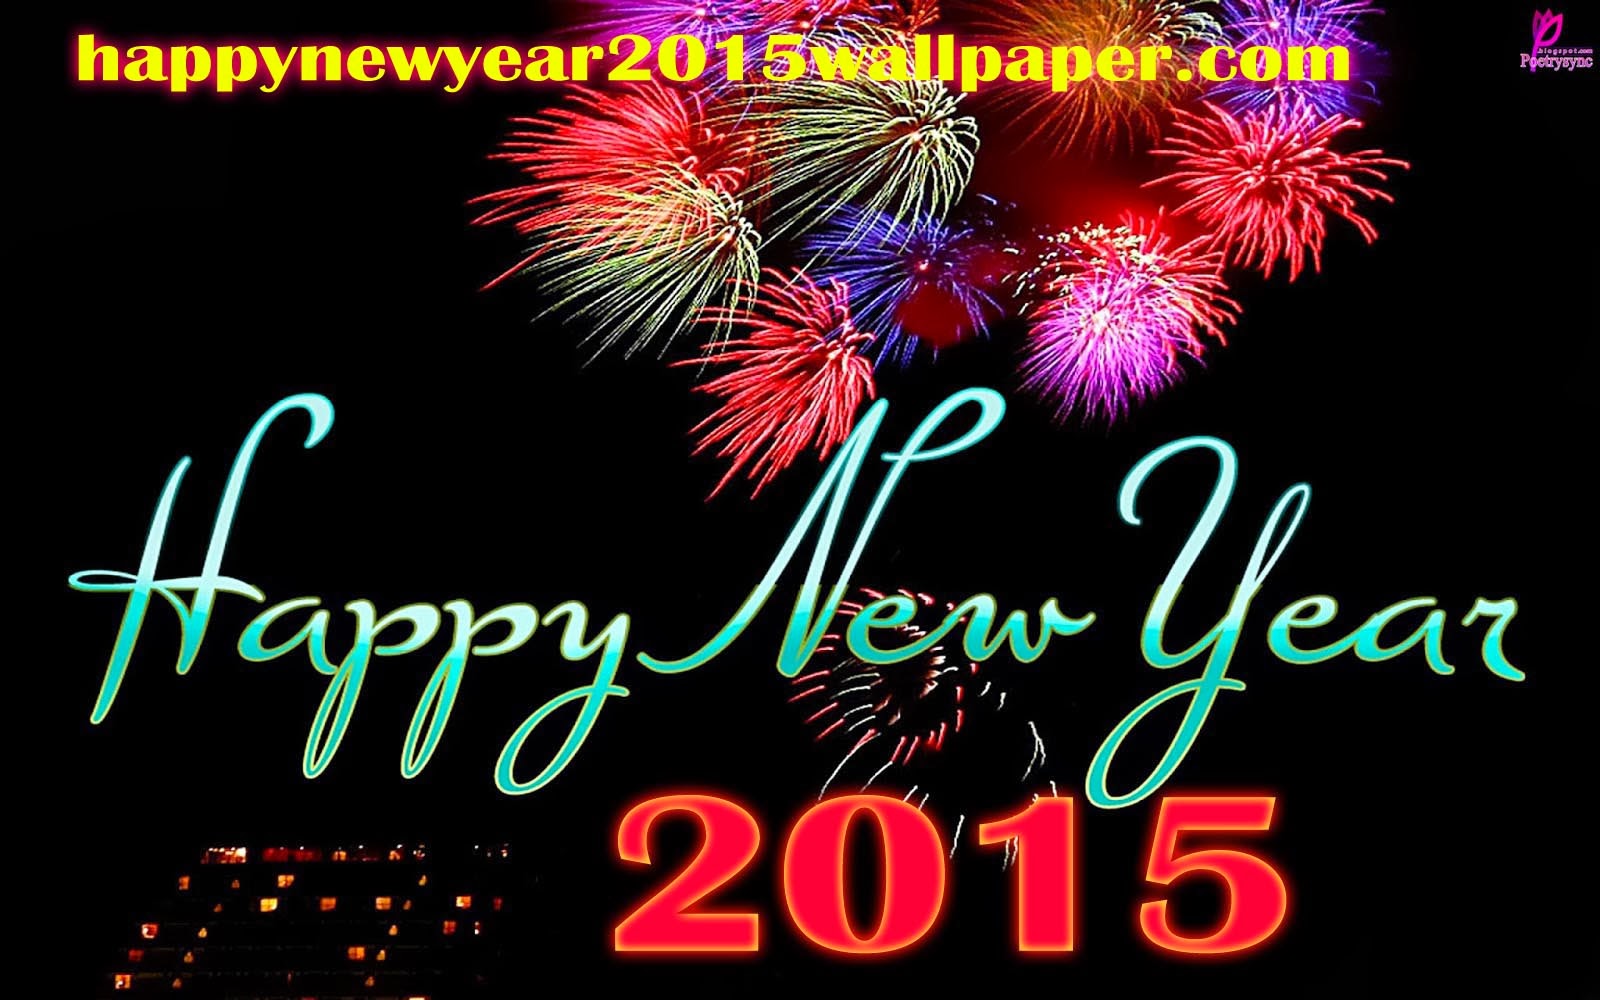 for happy new year 2015 wallpaper new year wishes wallpapers new year